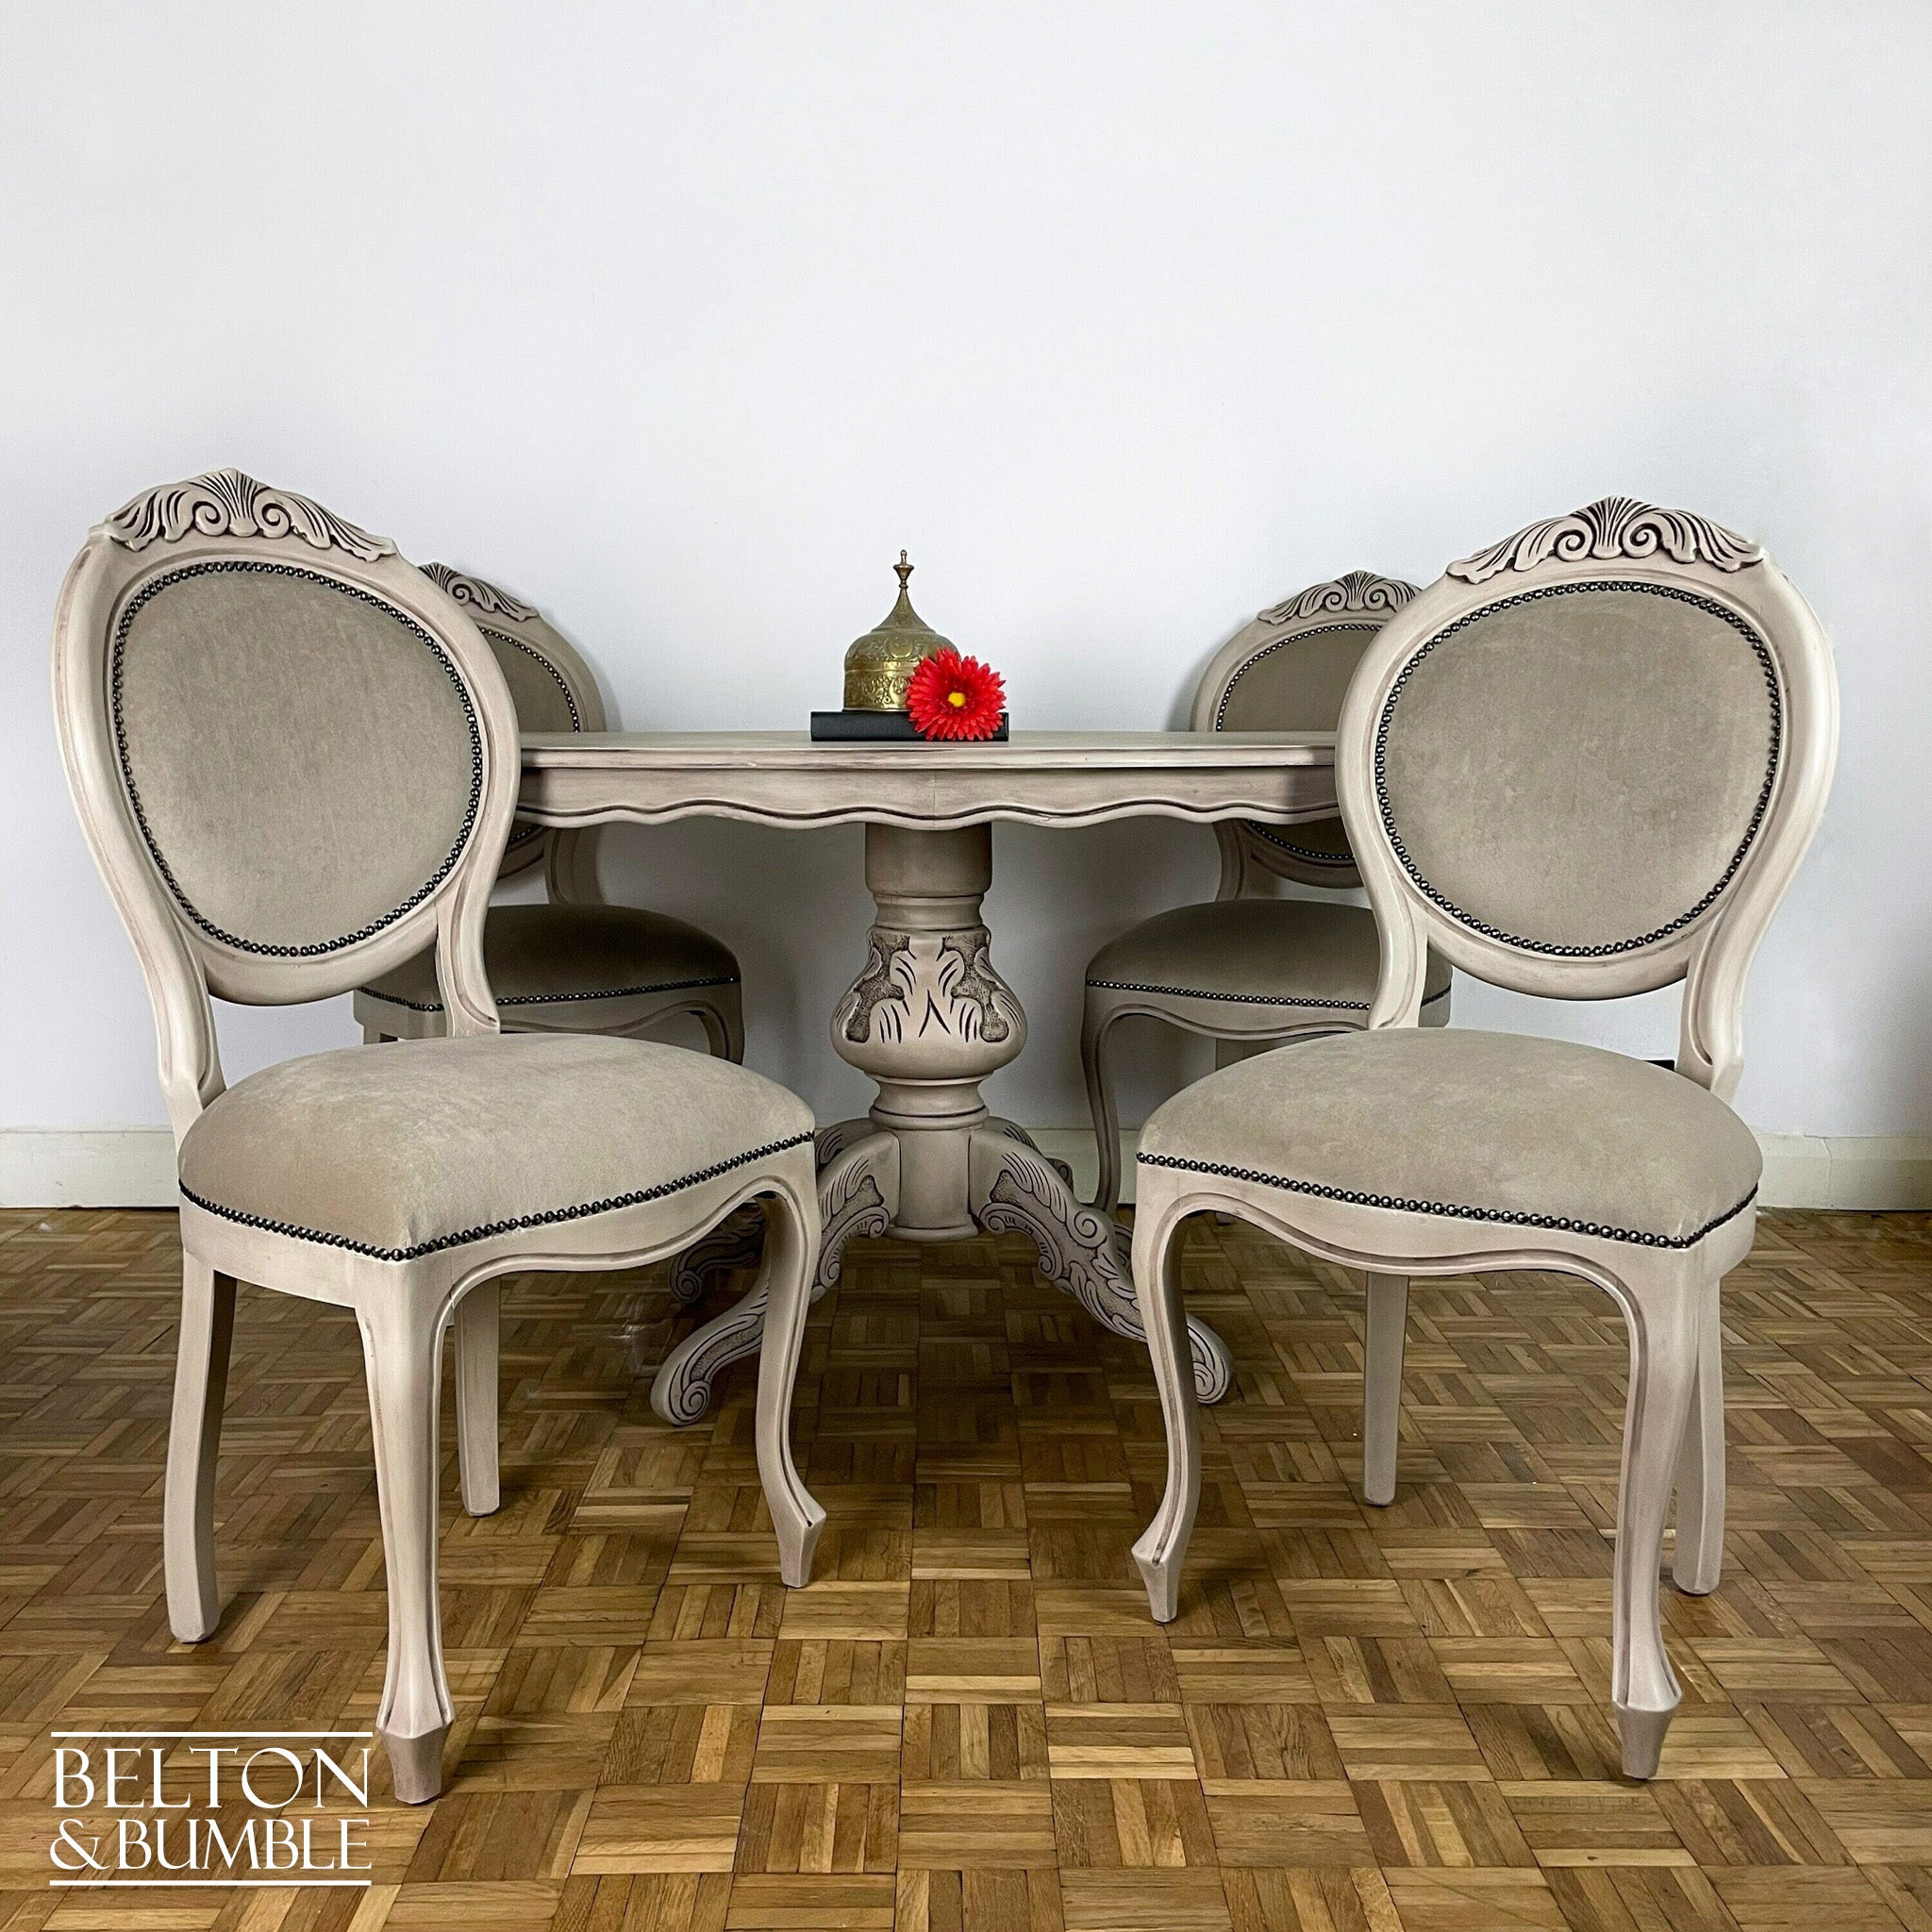 Italian Dining Table and Four Chair Set in Stone-Belton & Butler